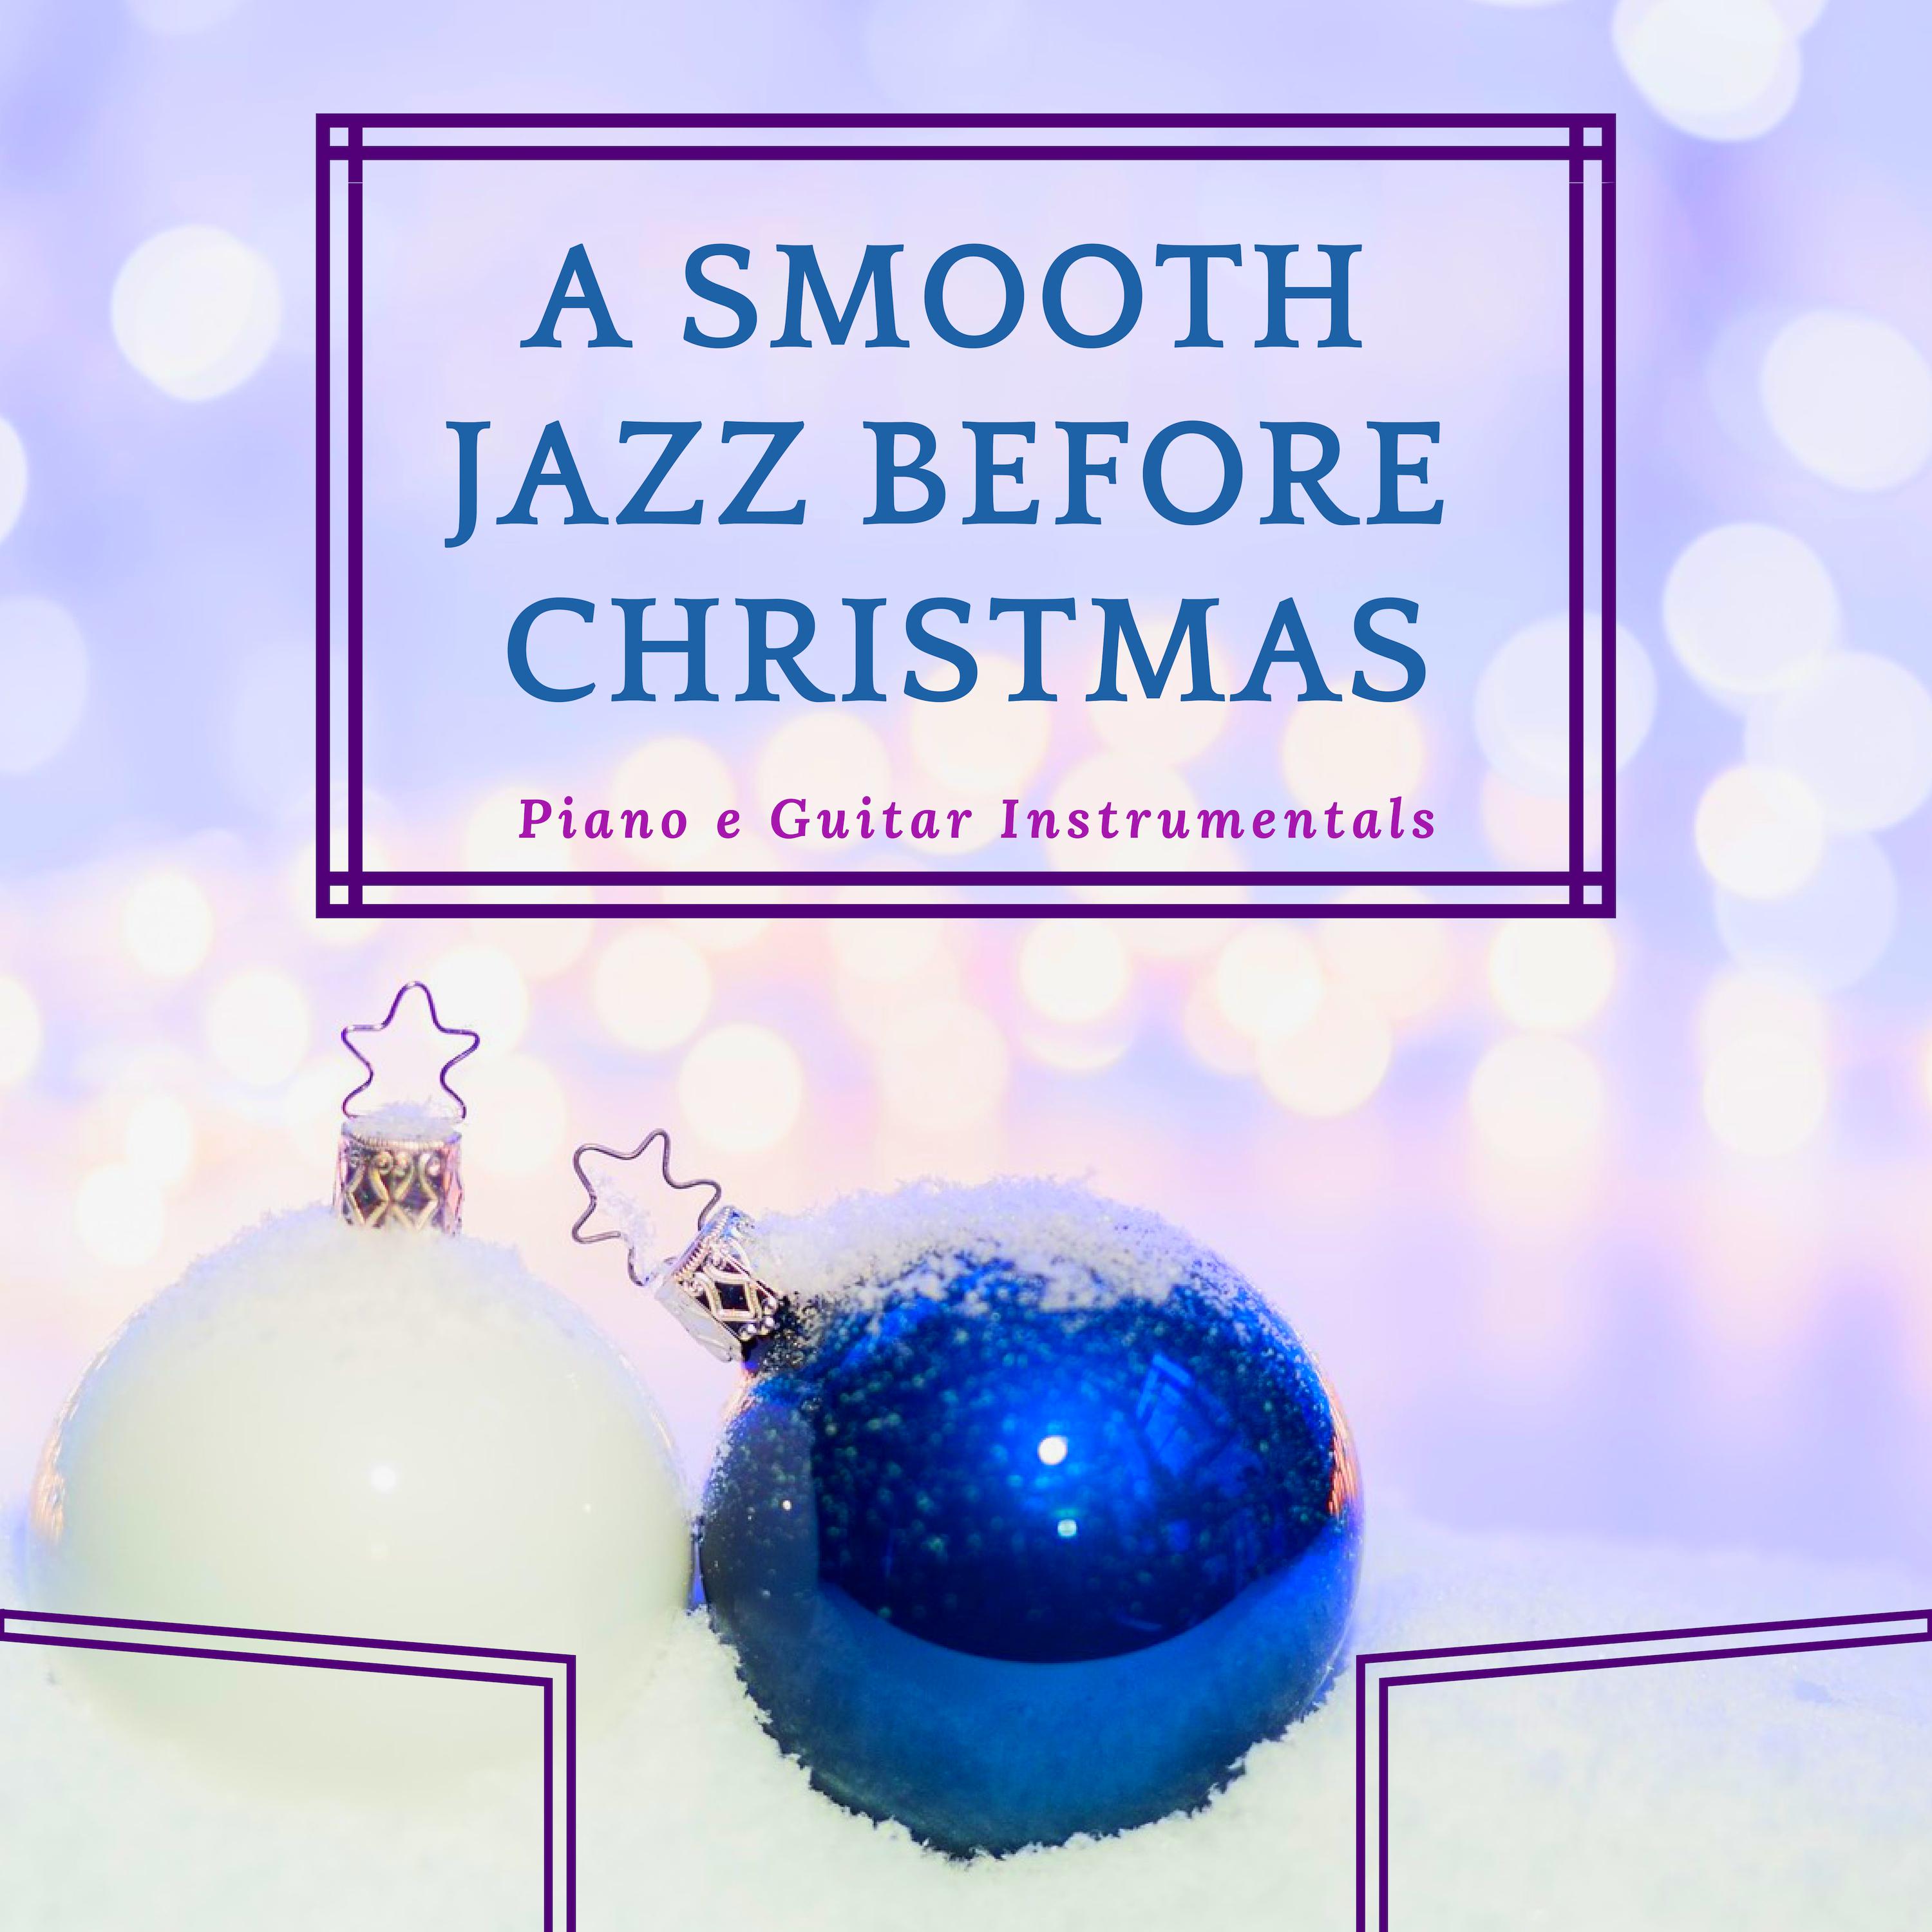 A Smooth Jazz Before Christmas